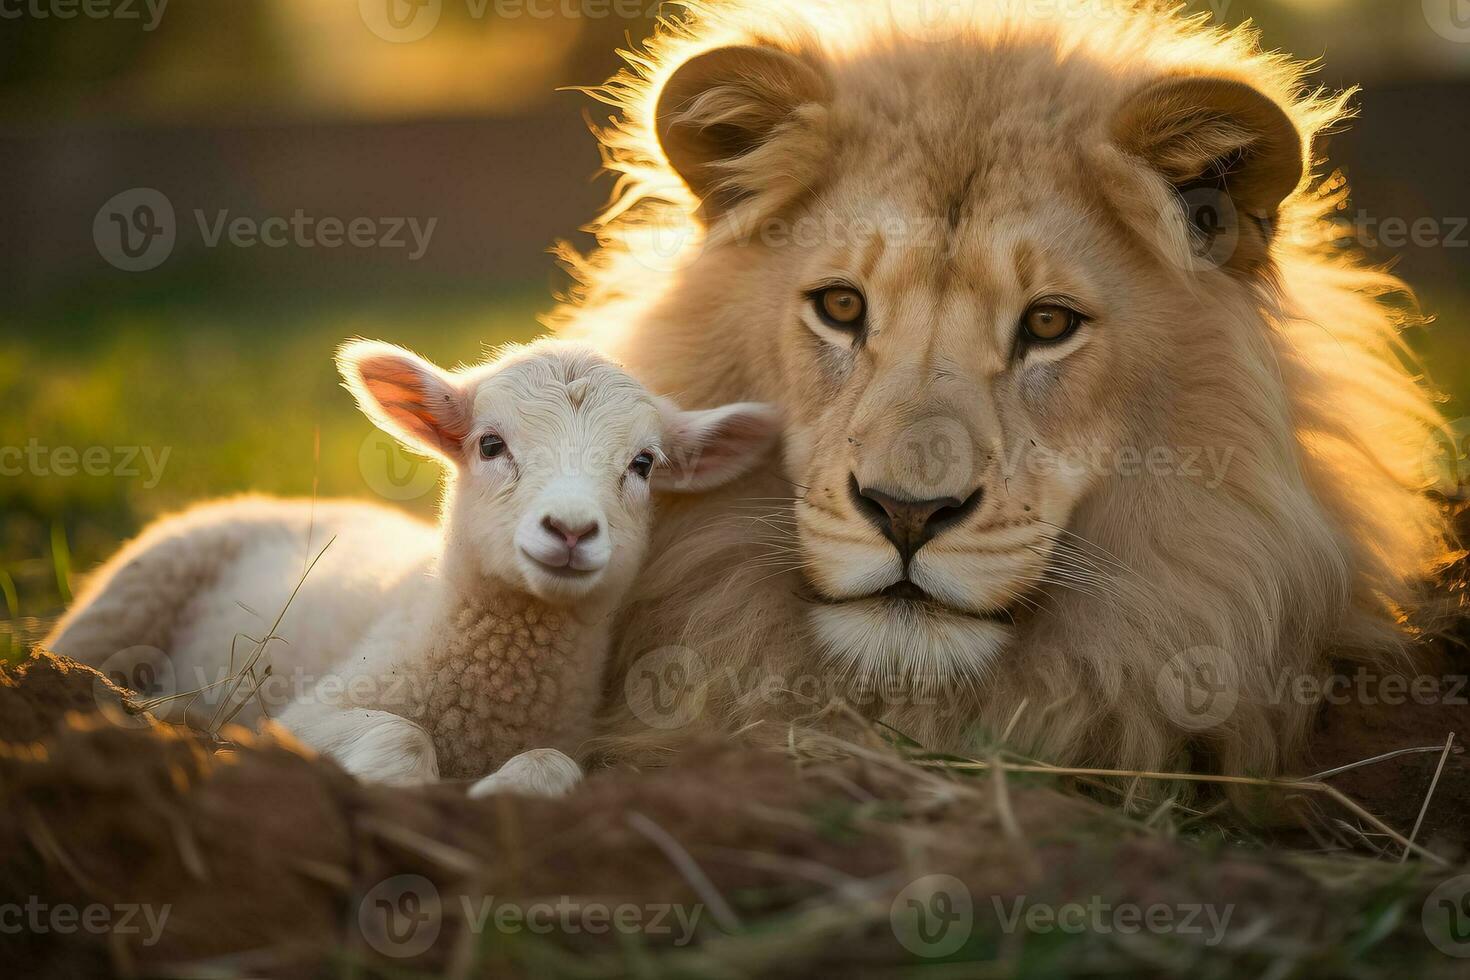 A lion and a lamb peacefully coexist in harmony photo